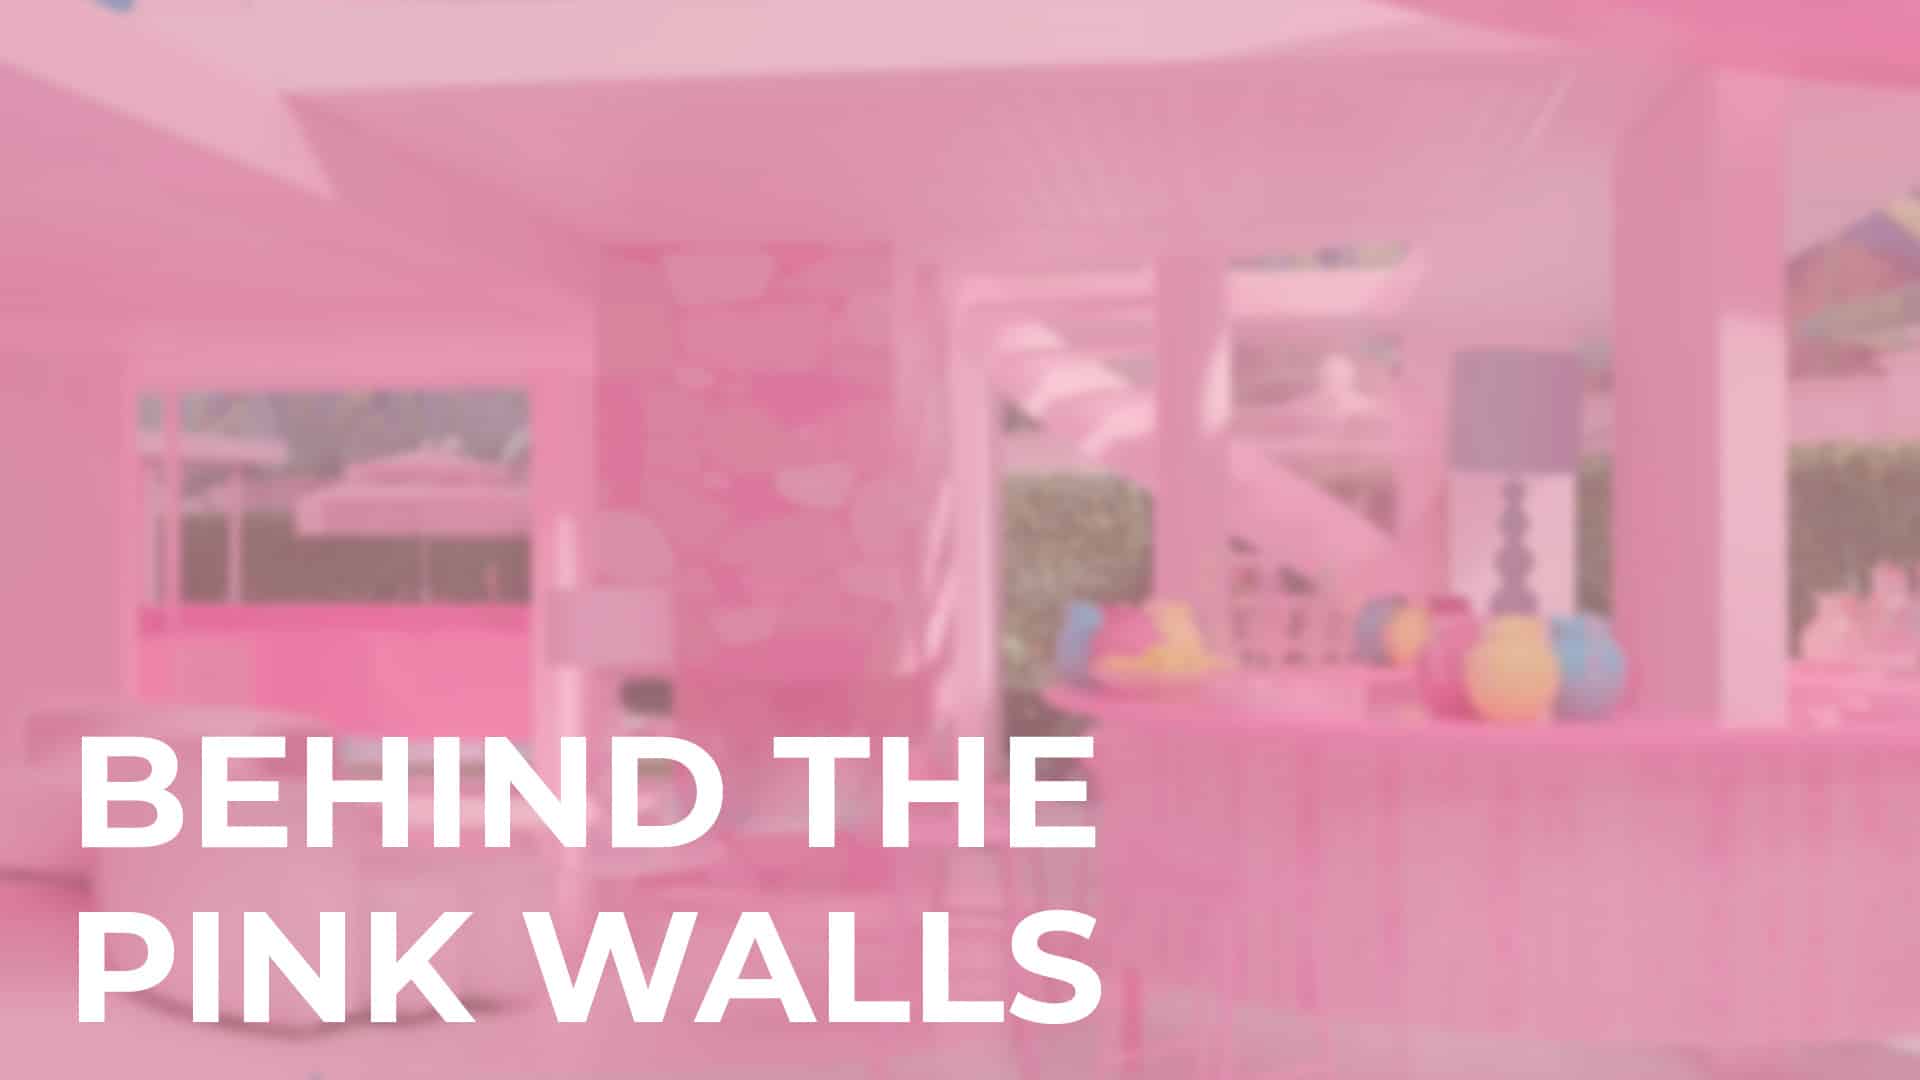 Video thumbnail, "Behind the pink walls" in text